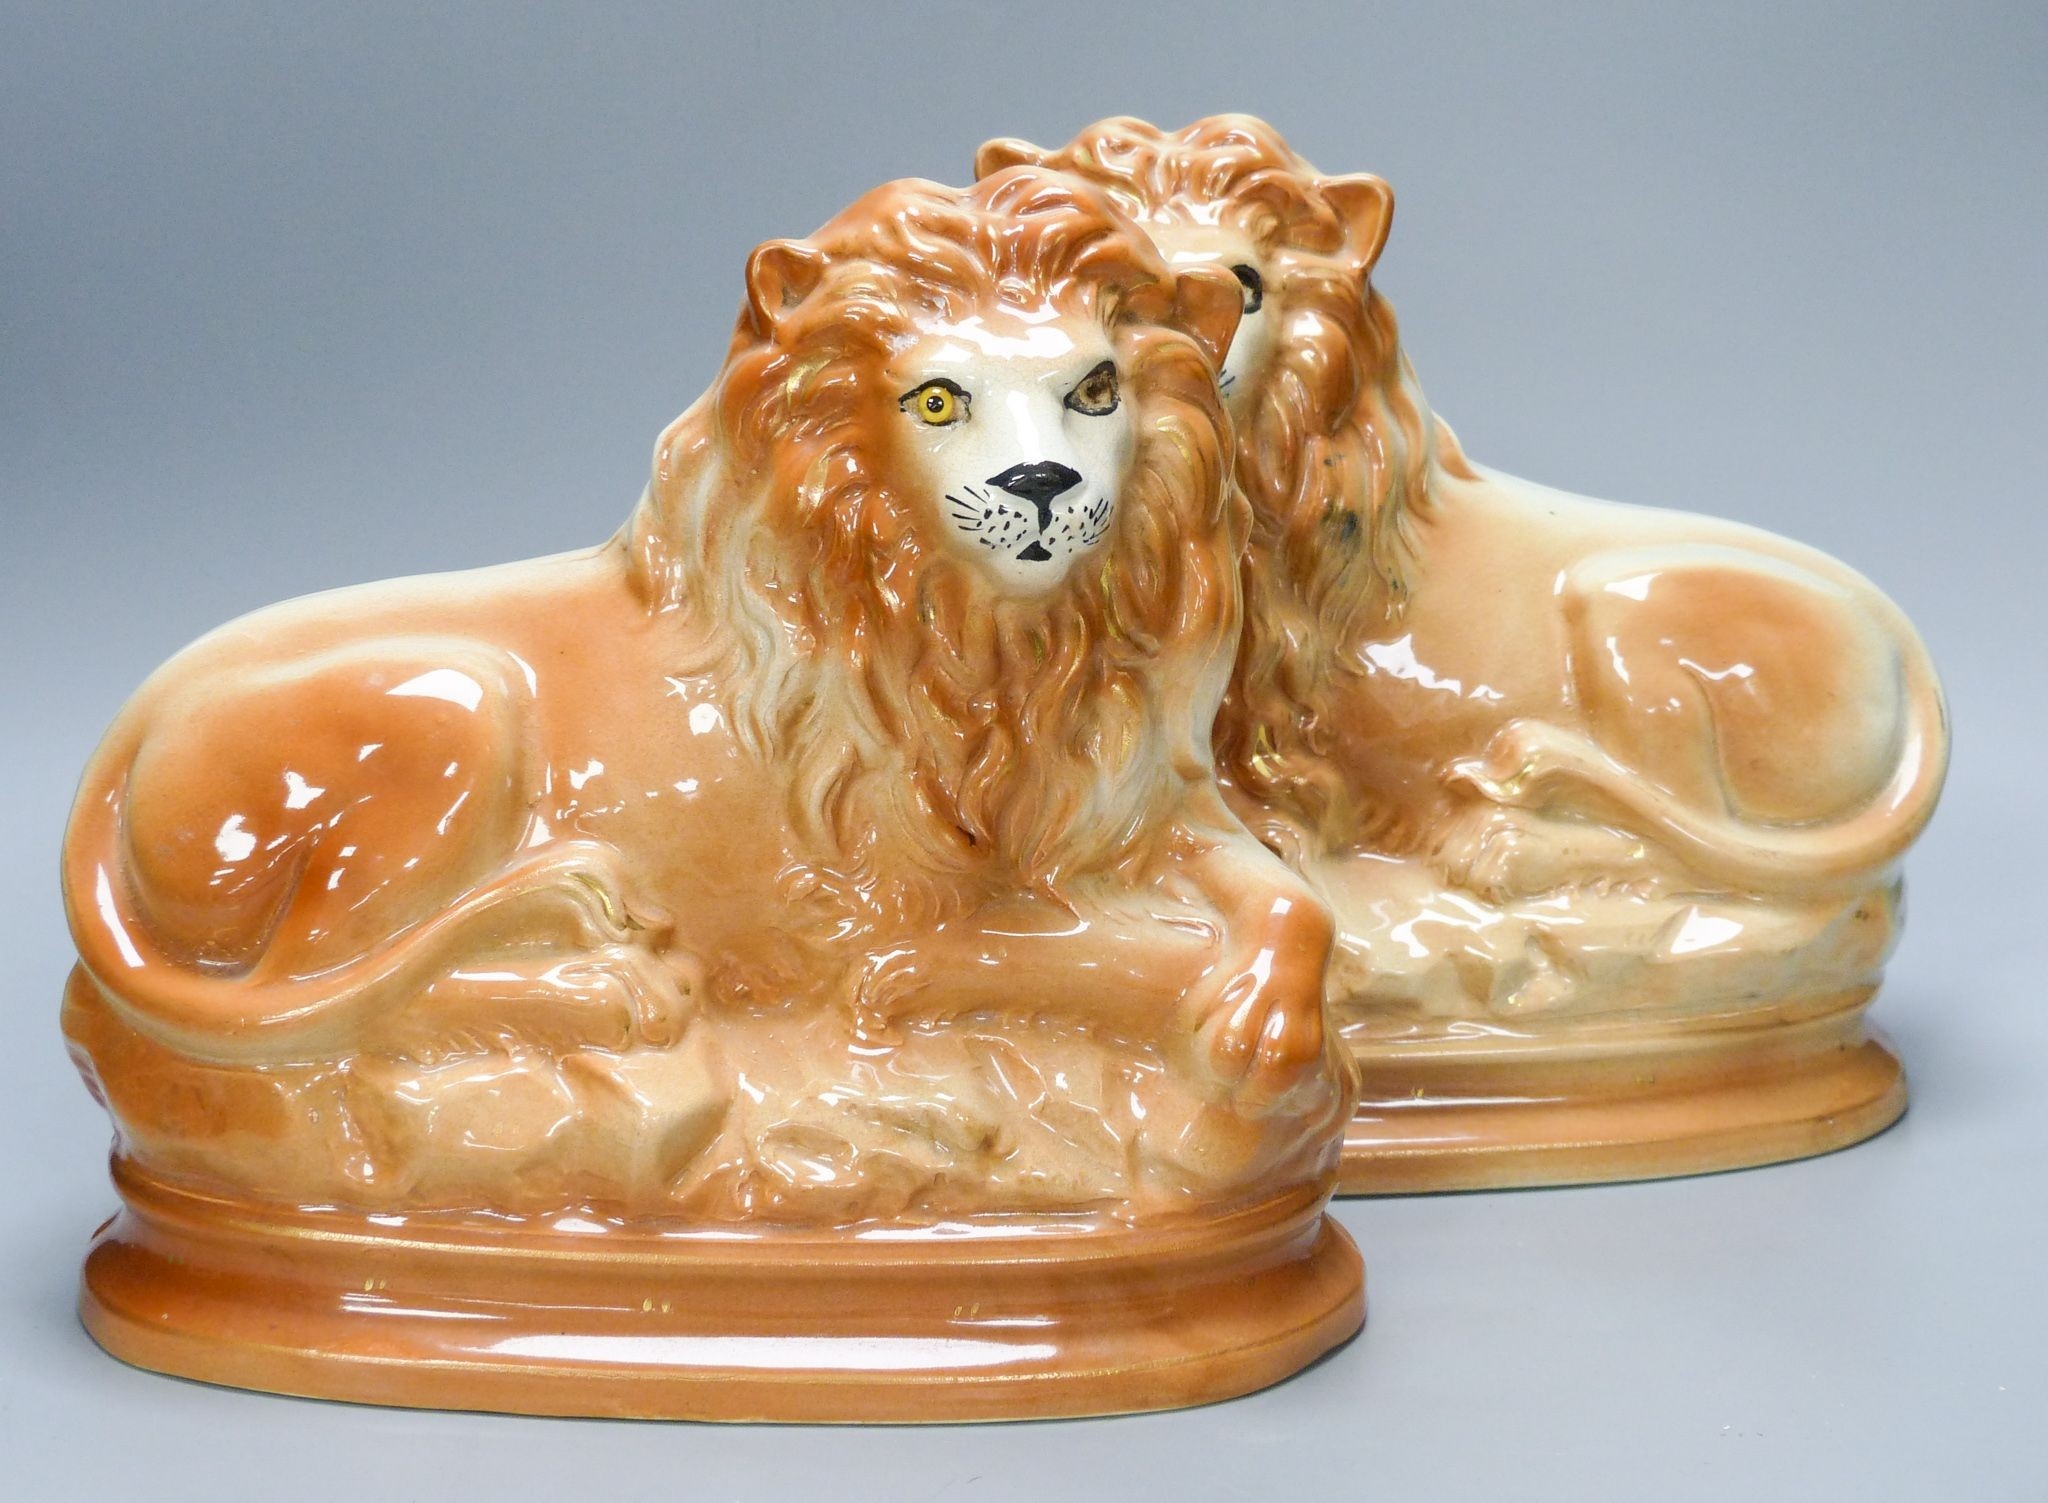 A pair of Staffordshire pottery 'lion' figures by Staffordshire